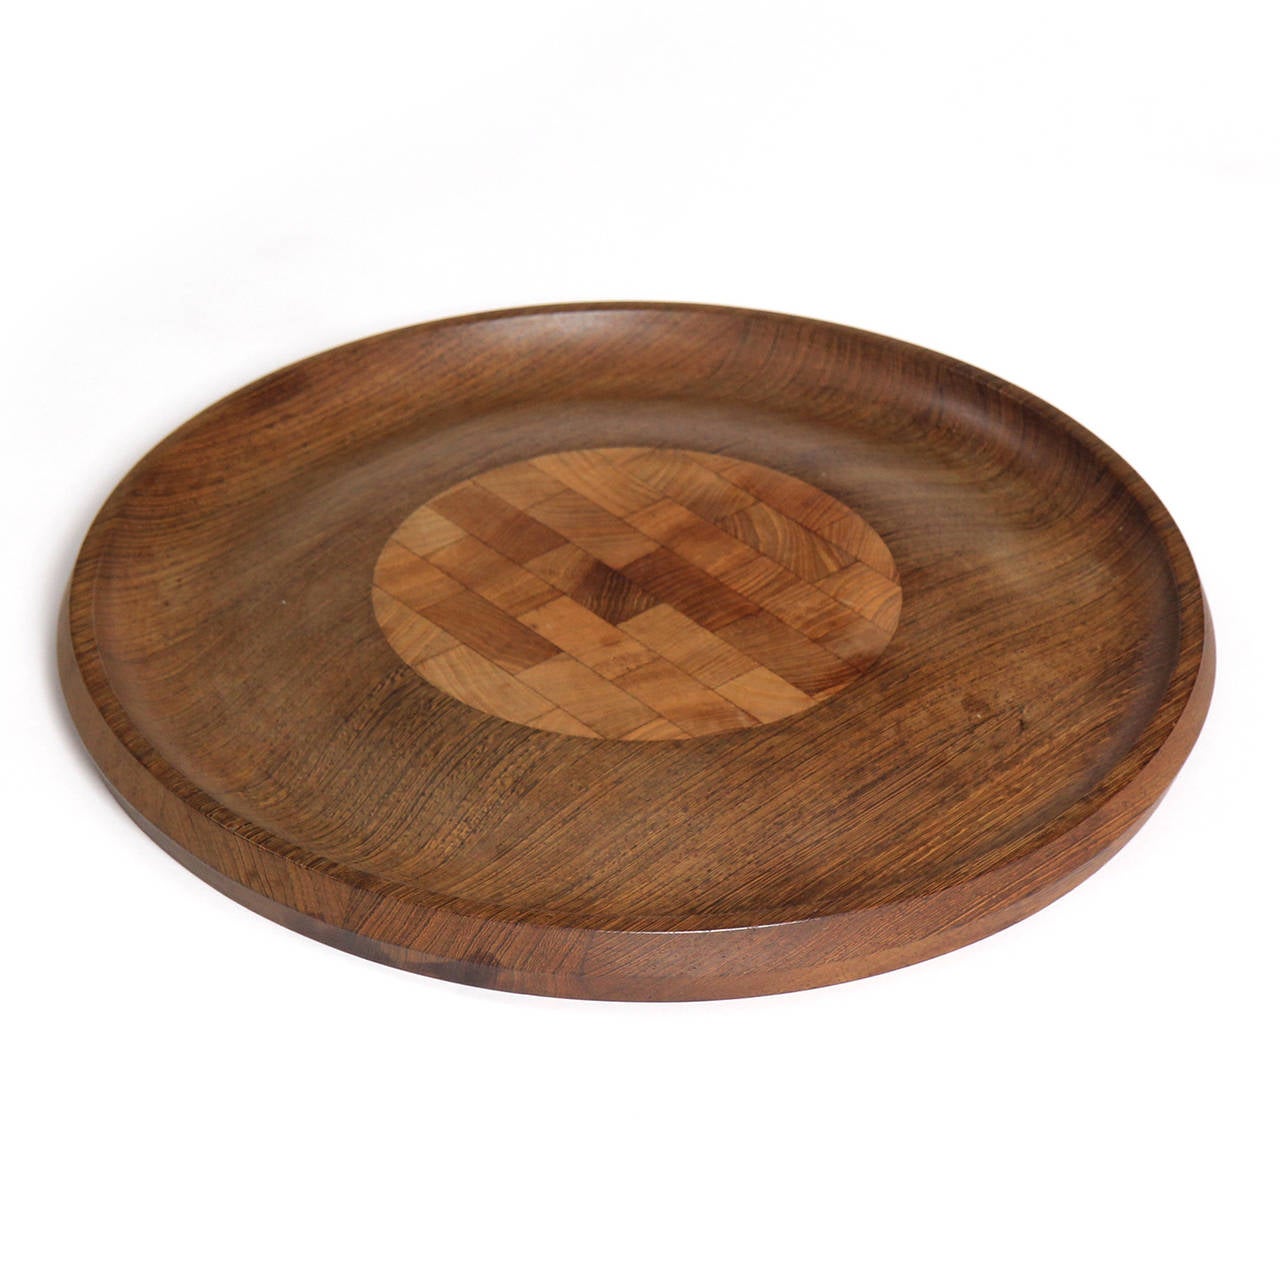 A beautifully crafted Scandinavian Modern round cheese board in rich striated wenge wood with a raised end-grain teak cutting surface and cracker moat. Made by Skjøde Skjernin Denmark circa 1960s.